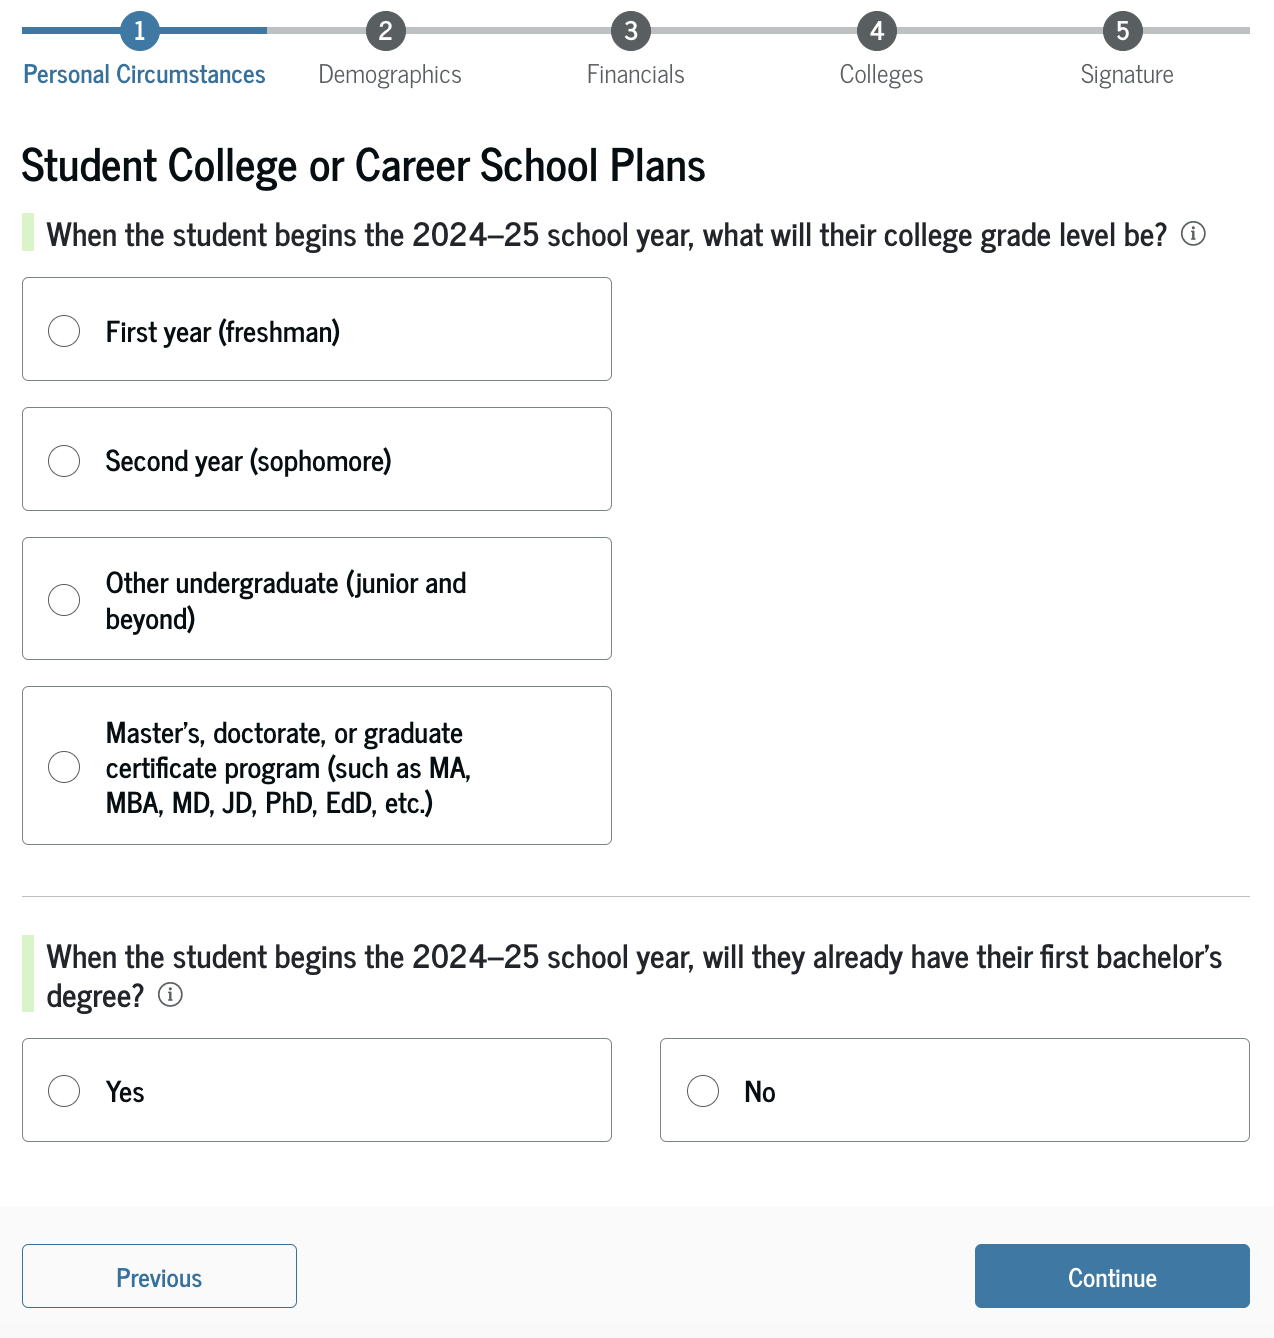 A screenshot showing the student personal circumstances in which a student would show their status in school.